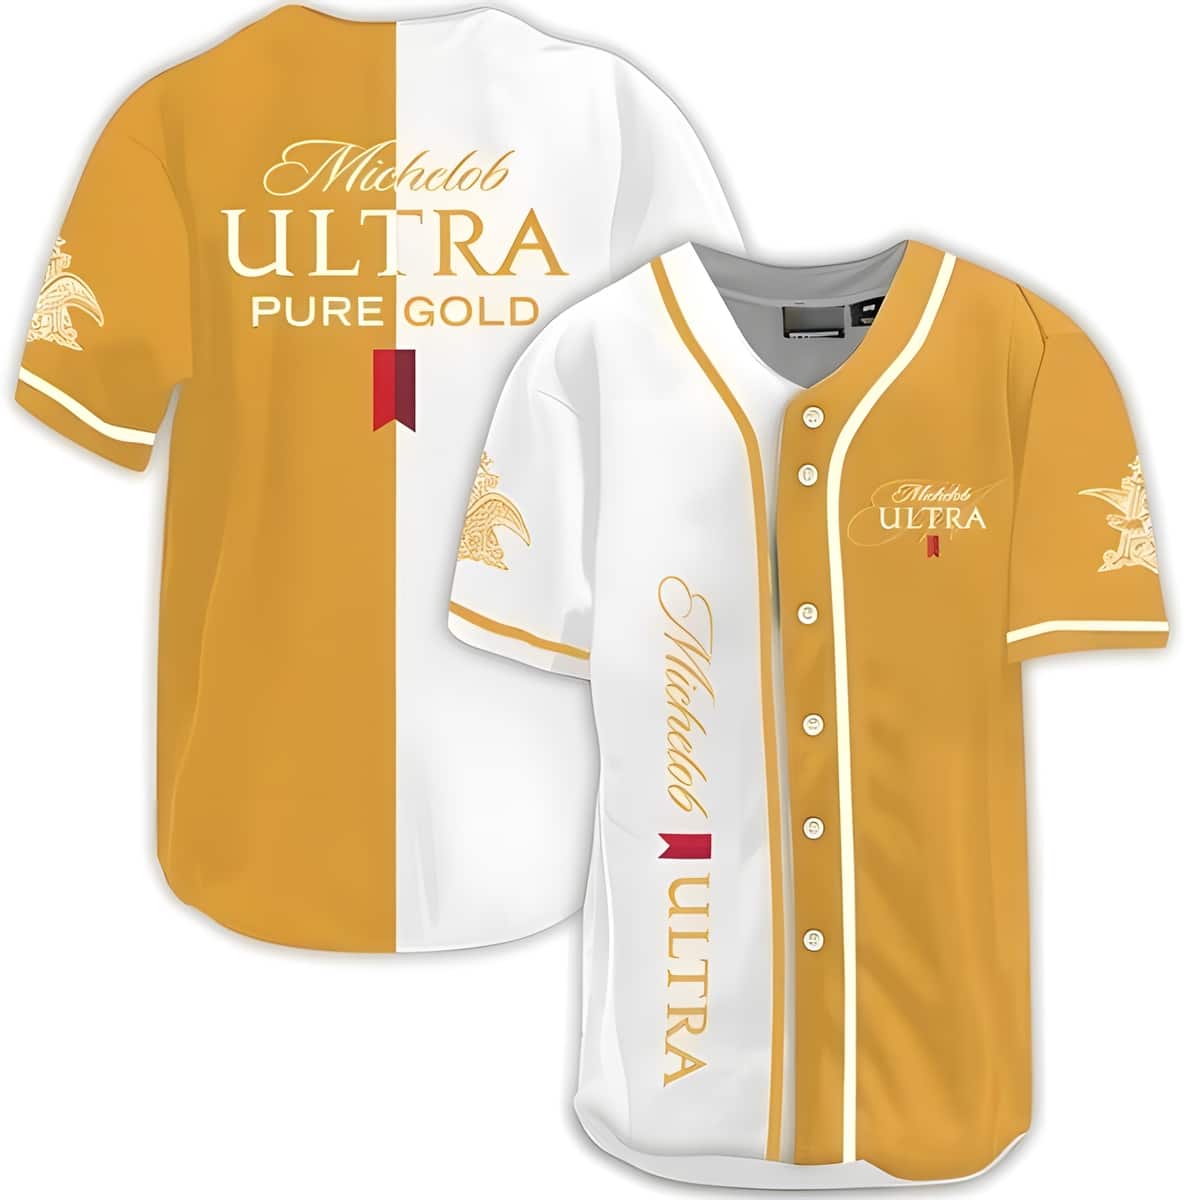 Michelob ULTRA Baseball Jersey Yellow White Dual Colors Gift For Fans